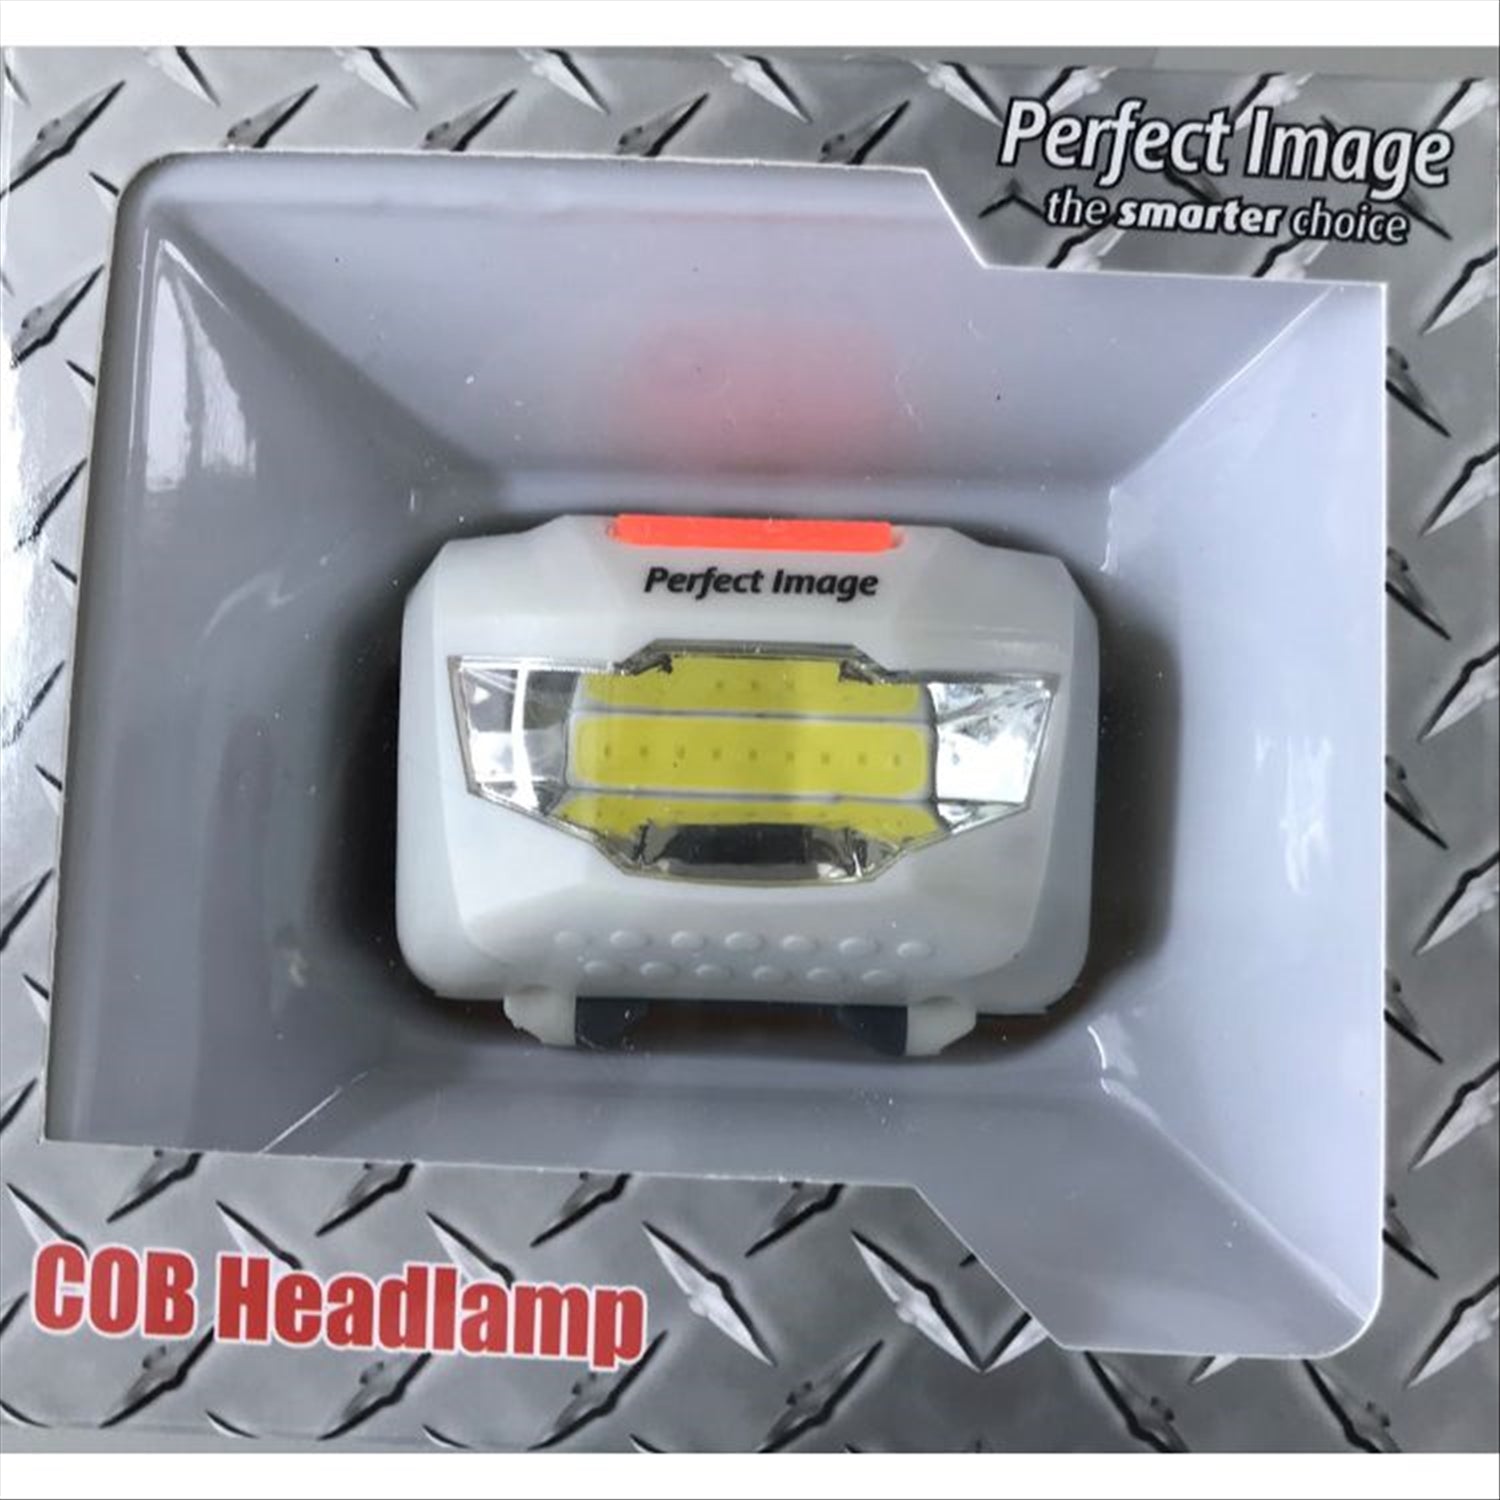 Perfect Image Headlamp 180 Lumens with Batteries